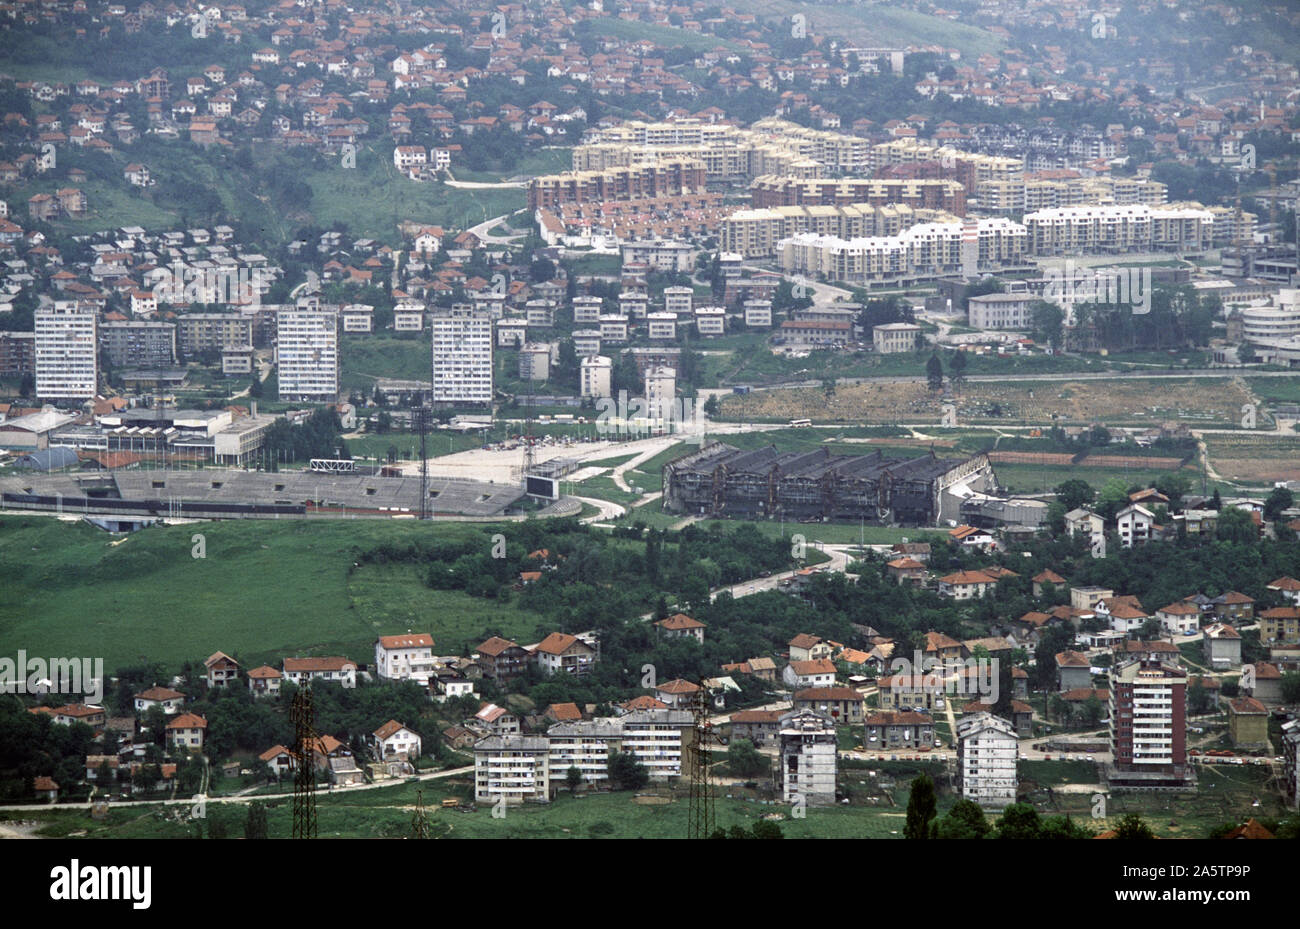 6th June 1993 During the Siege of Sarajevo: the view east from Hum Hill. The Koševo City Stadium is on the left and the burned-out Juan Antonio Samaranch Olympic Hall (formerly known as the Zetra Olympic Hall) centre-right. Immediately above the hall is the 'Lion' cemetery. Stock Photo